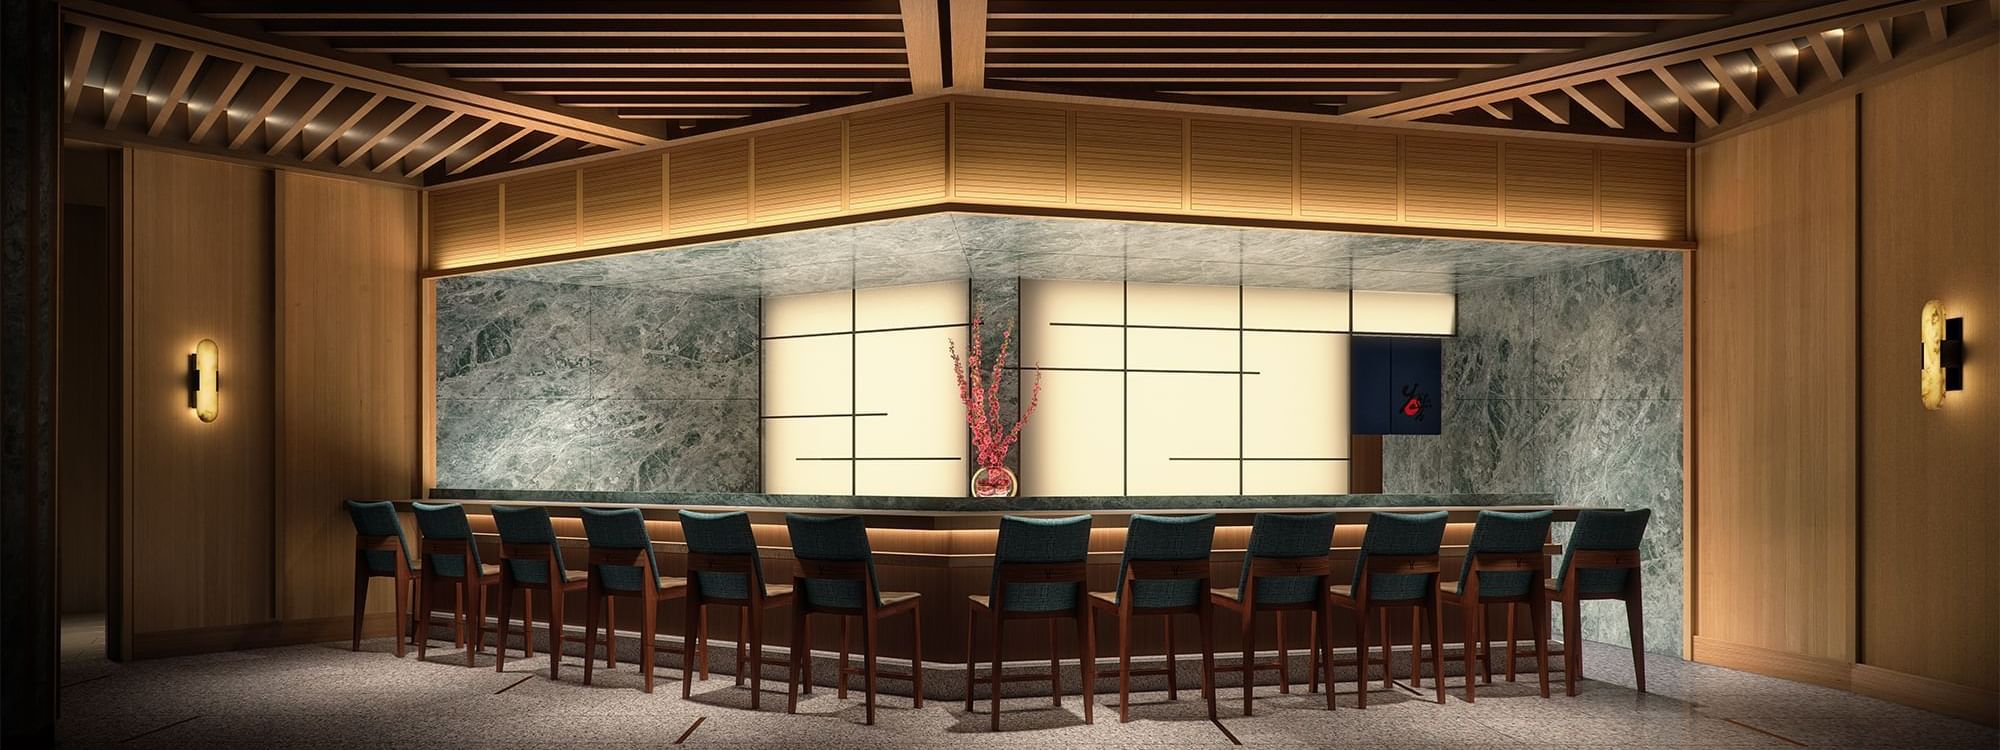 Bar counter in Nobu restaurant at Crown Towers Sydney Hotel

